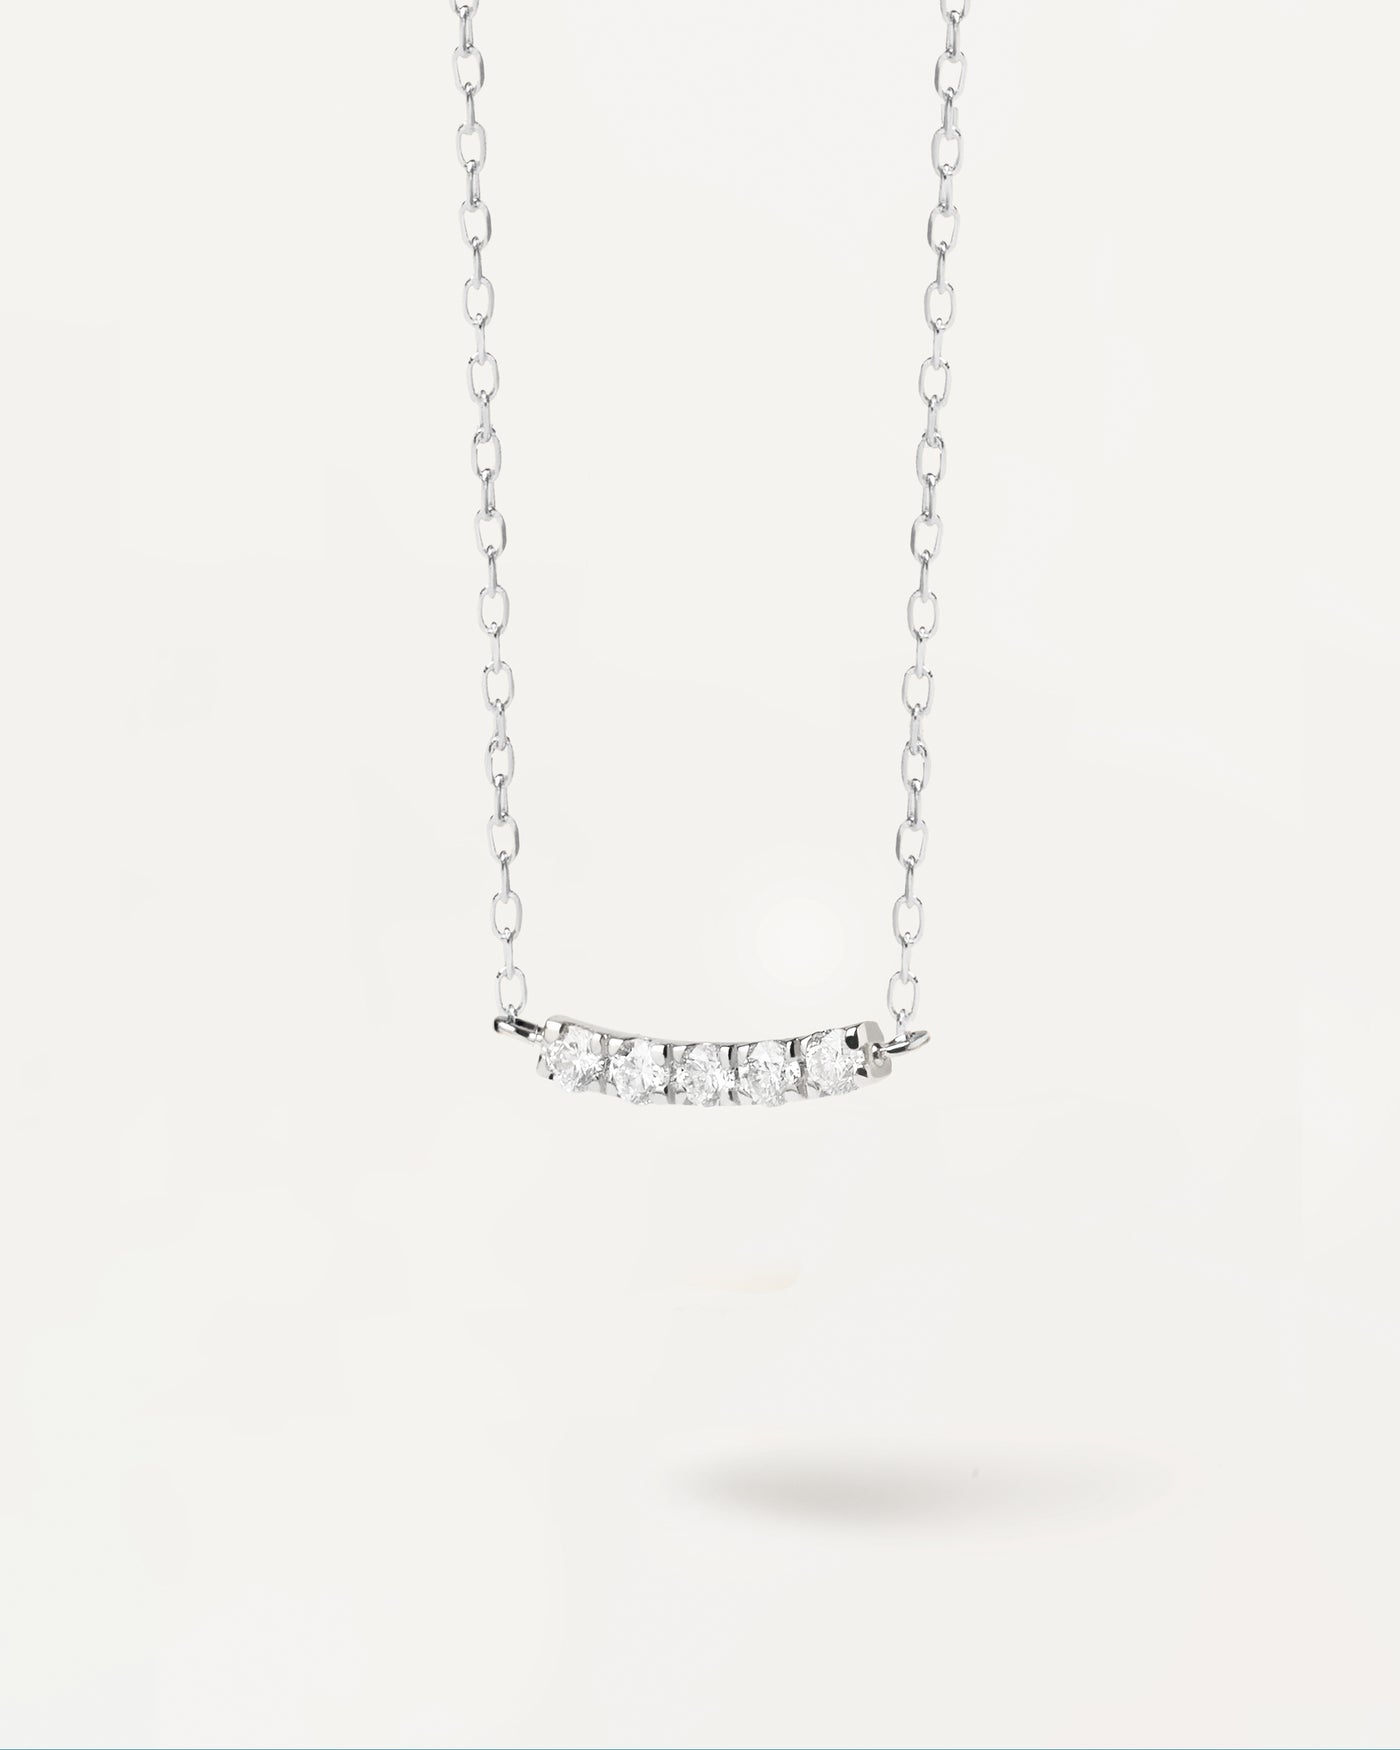 Diamonds and White Gold Eternity Necklace - 18K solid white gold